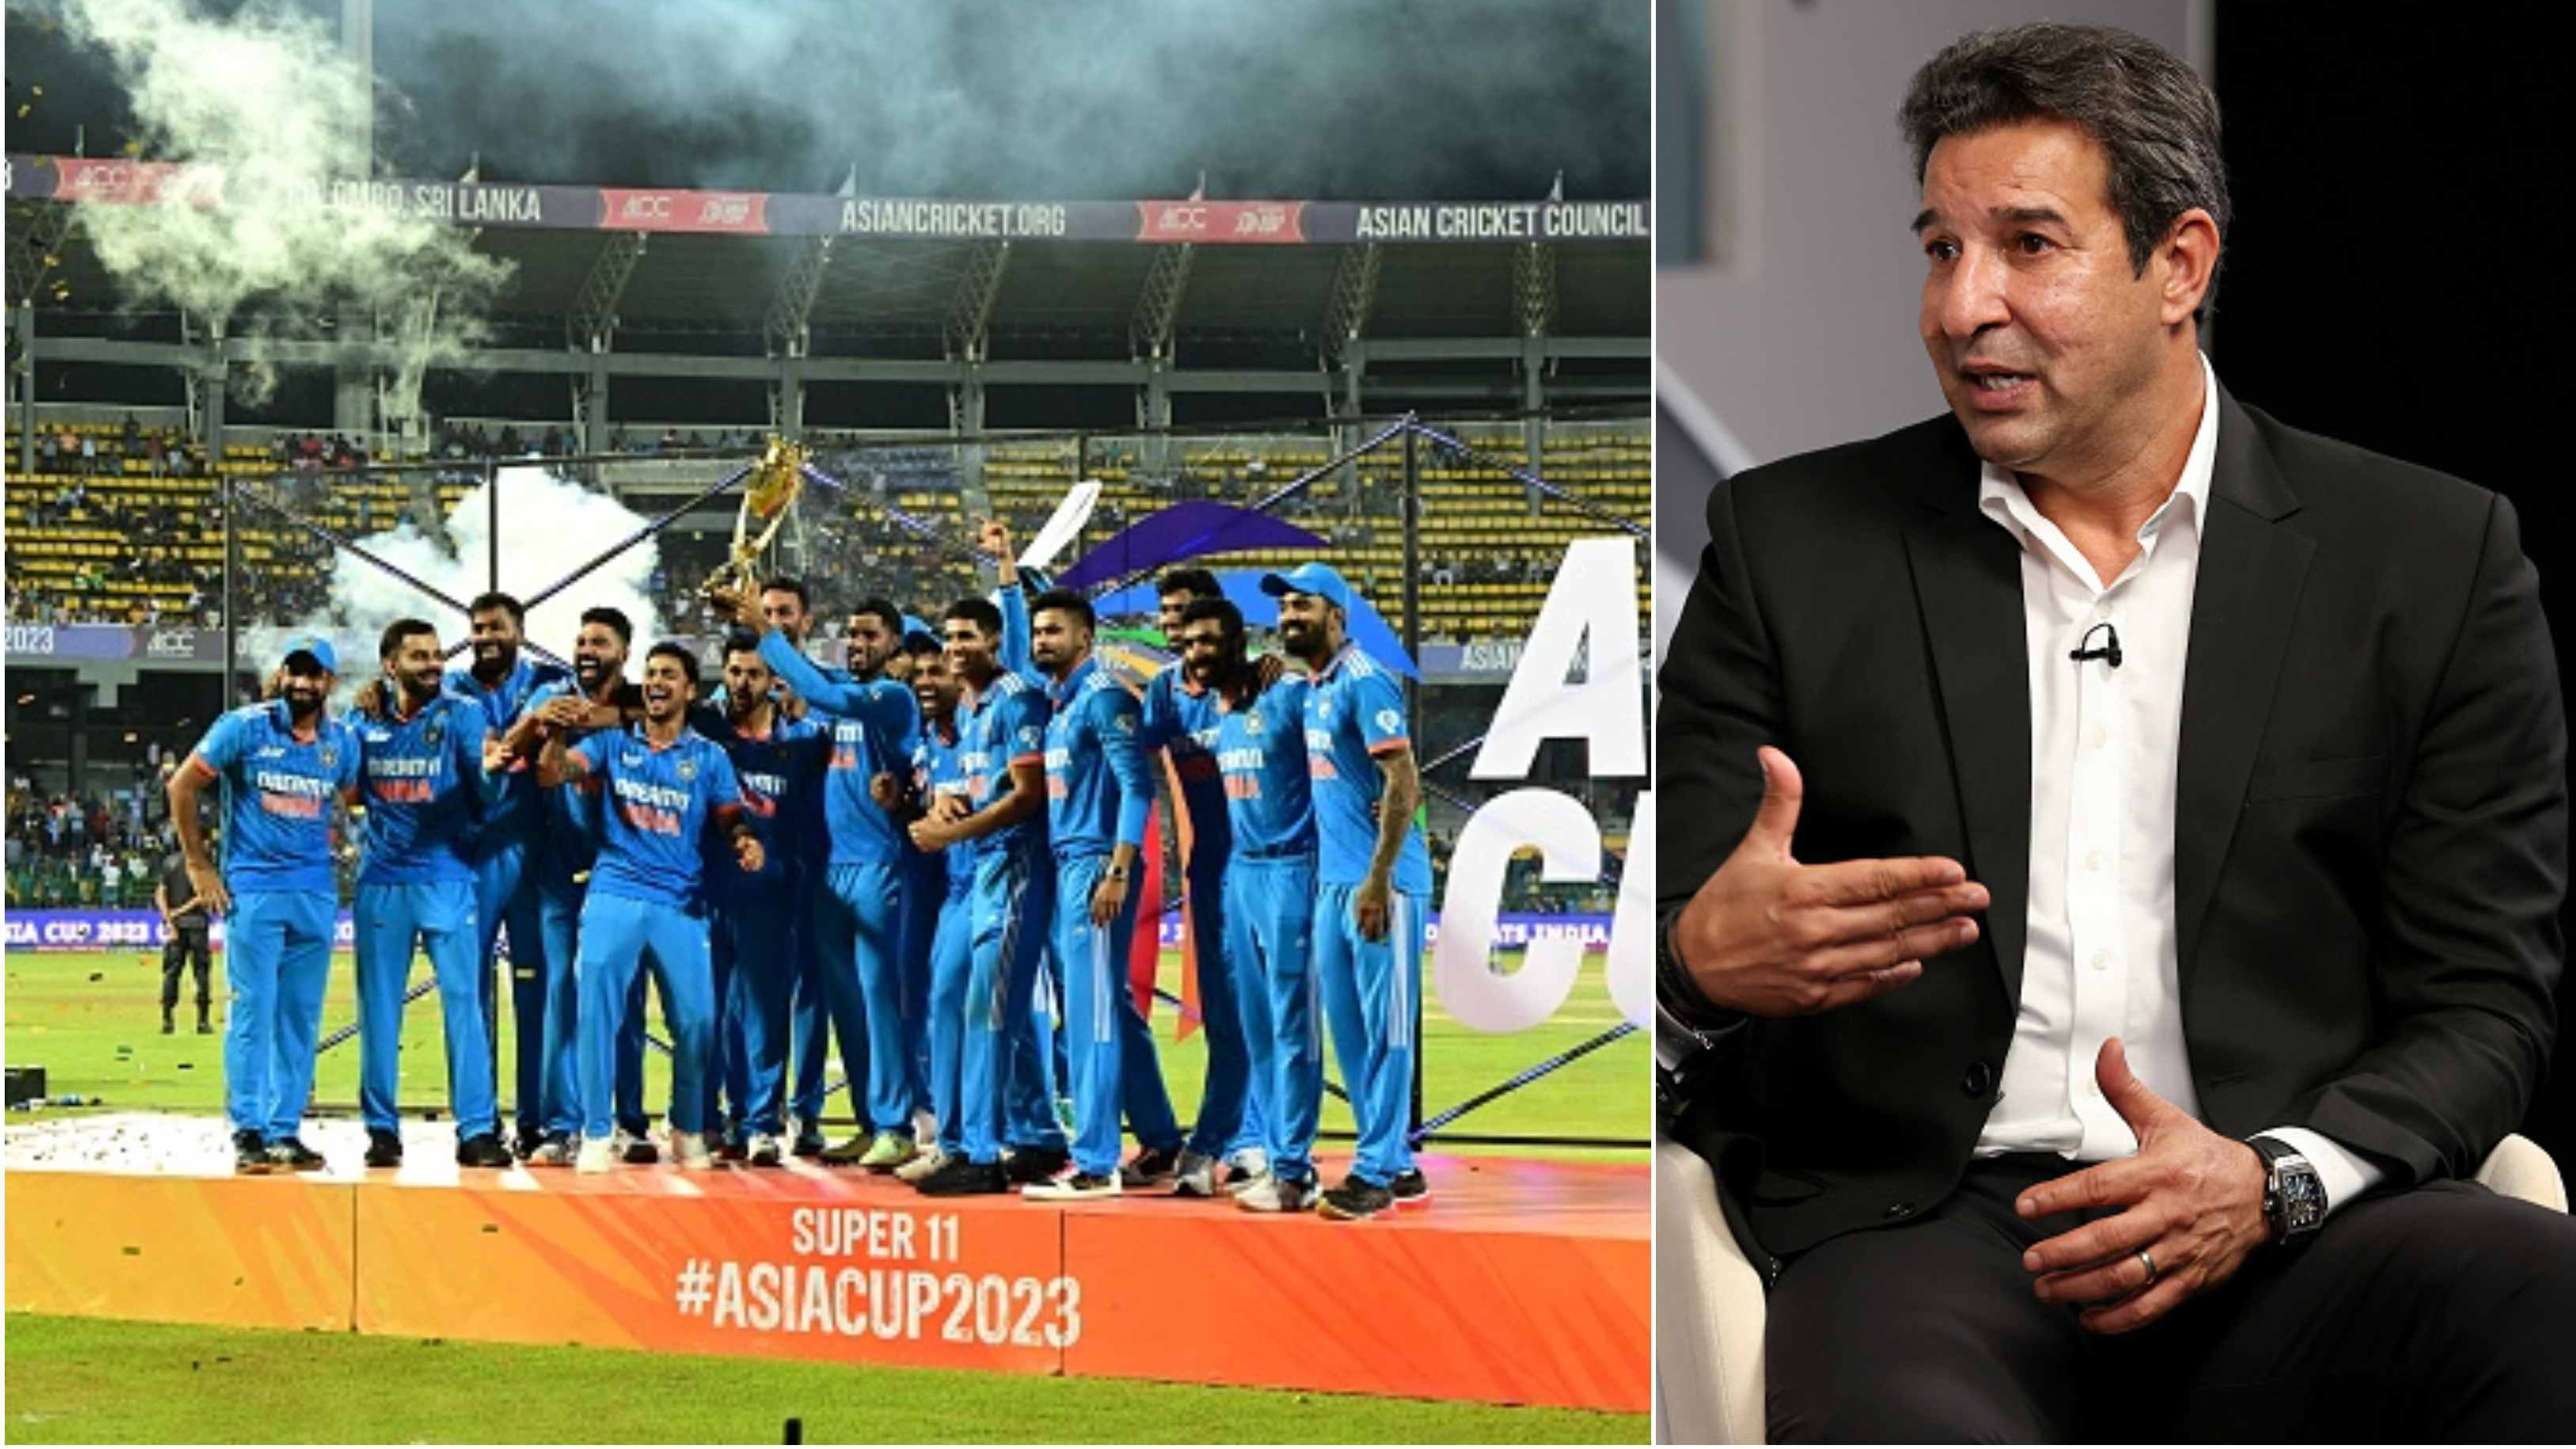 IND v AUS 2023: Indian players could get tired with Australia ODIs, Wasim Akram warns BCCI ahead of World Cup